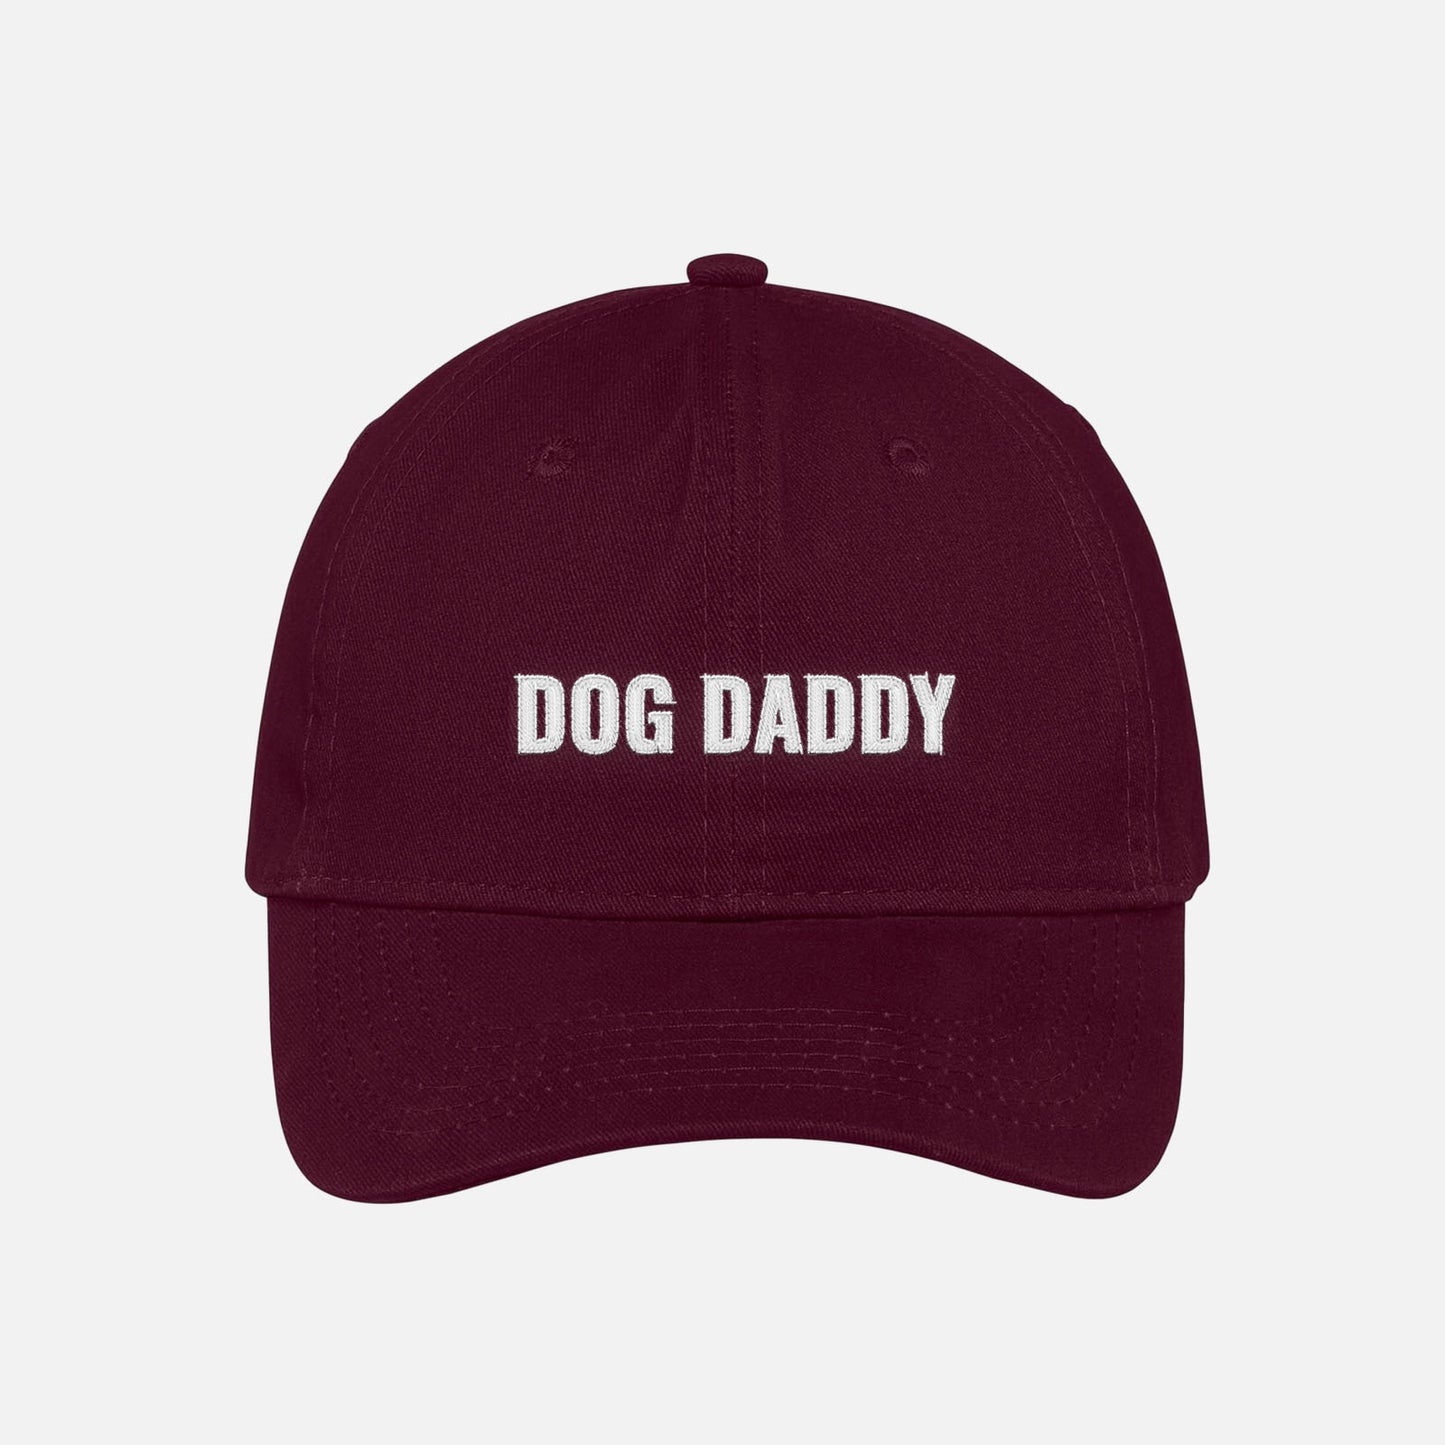 Maroon dog daddy dad hat embroidered baseball cap with white text.